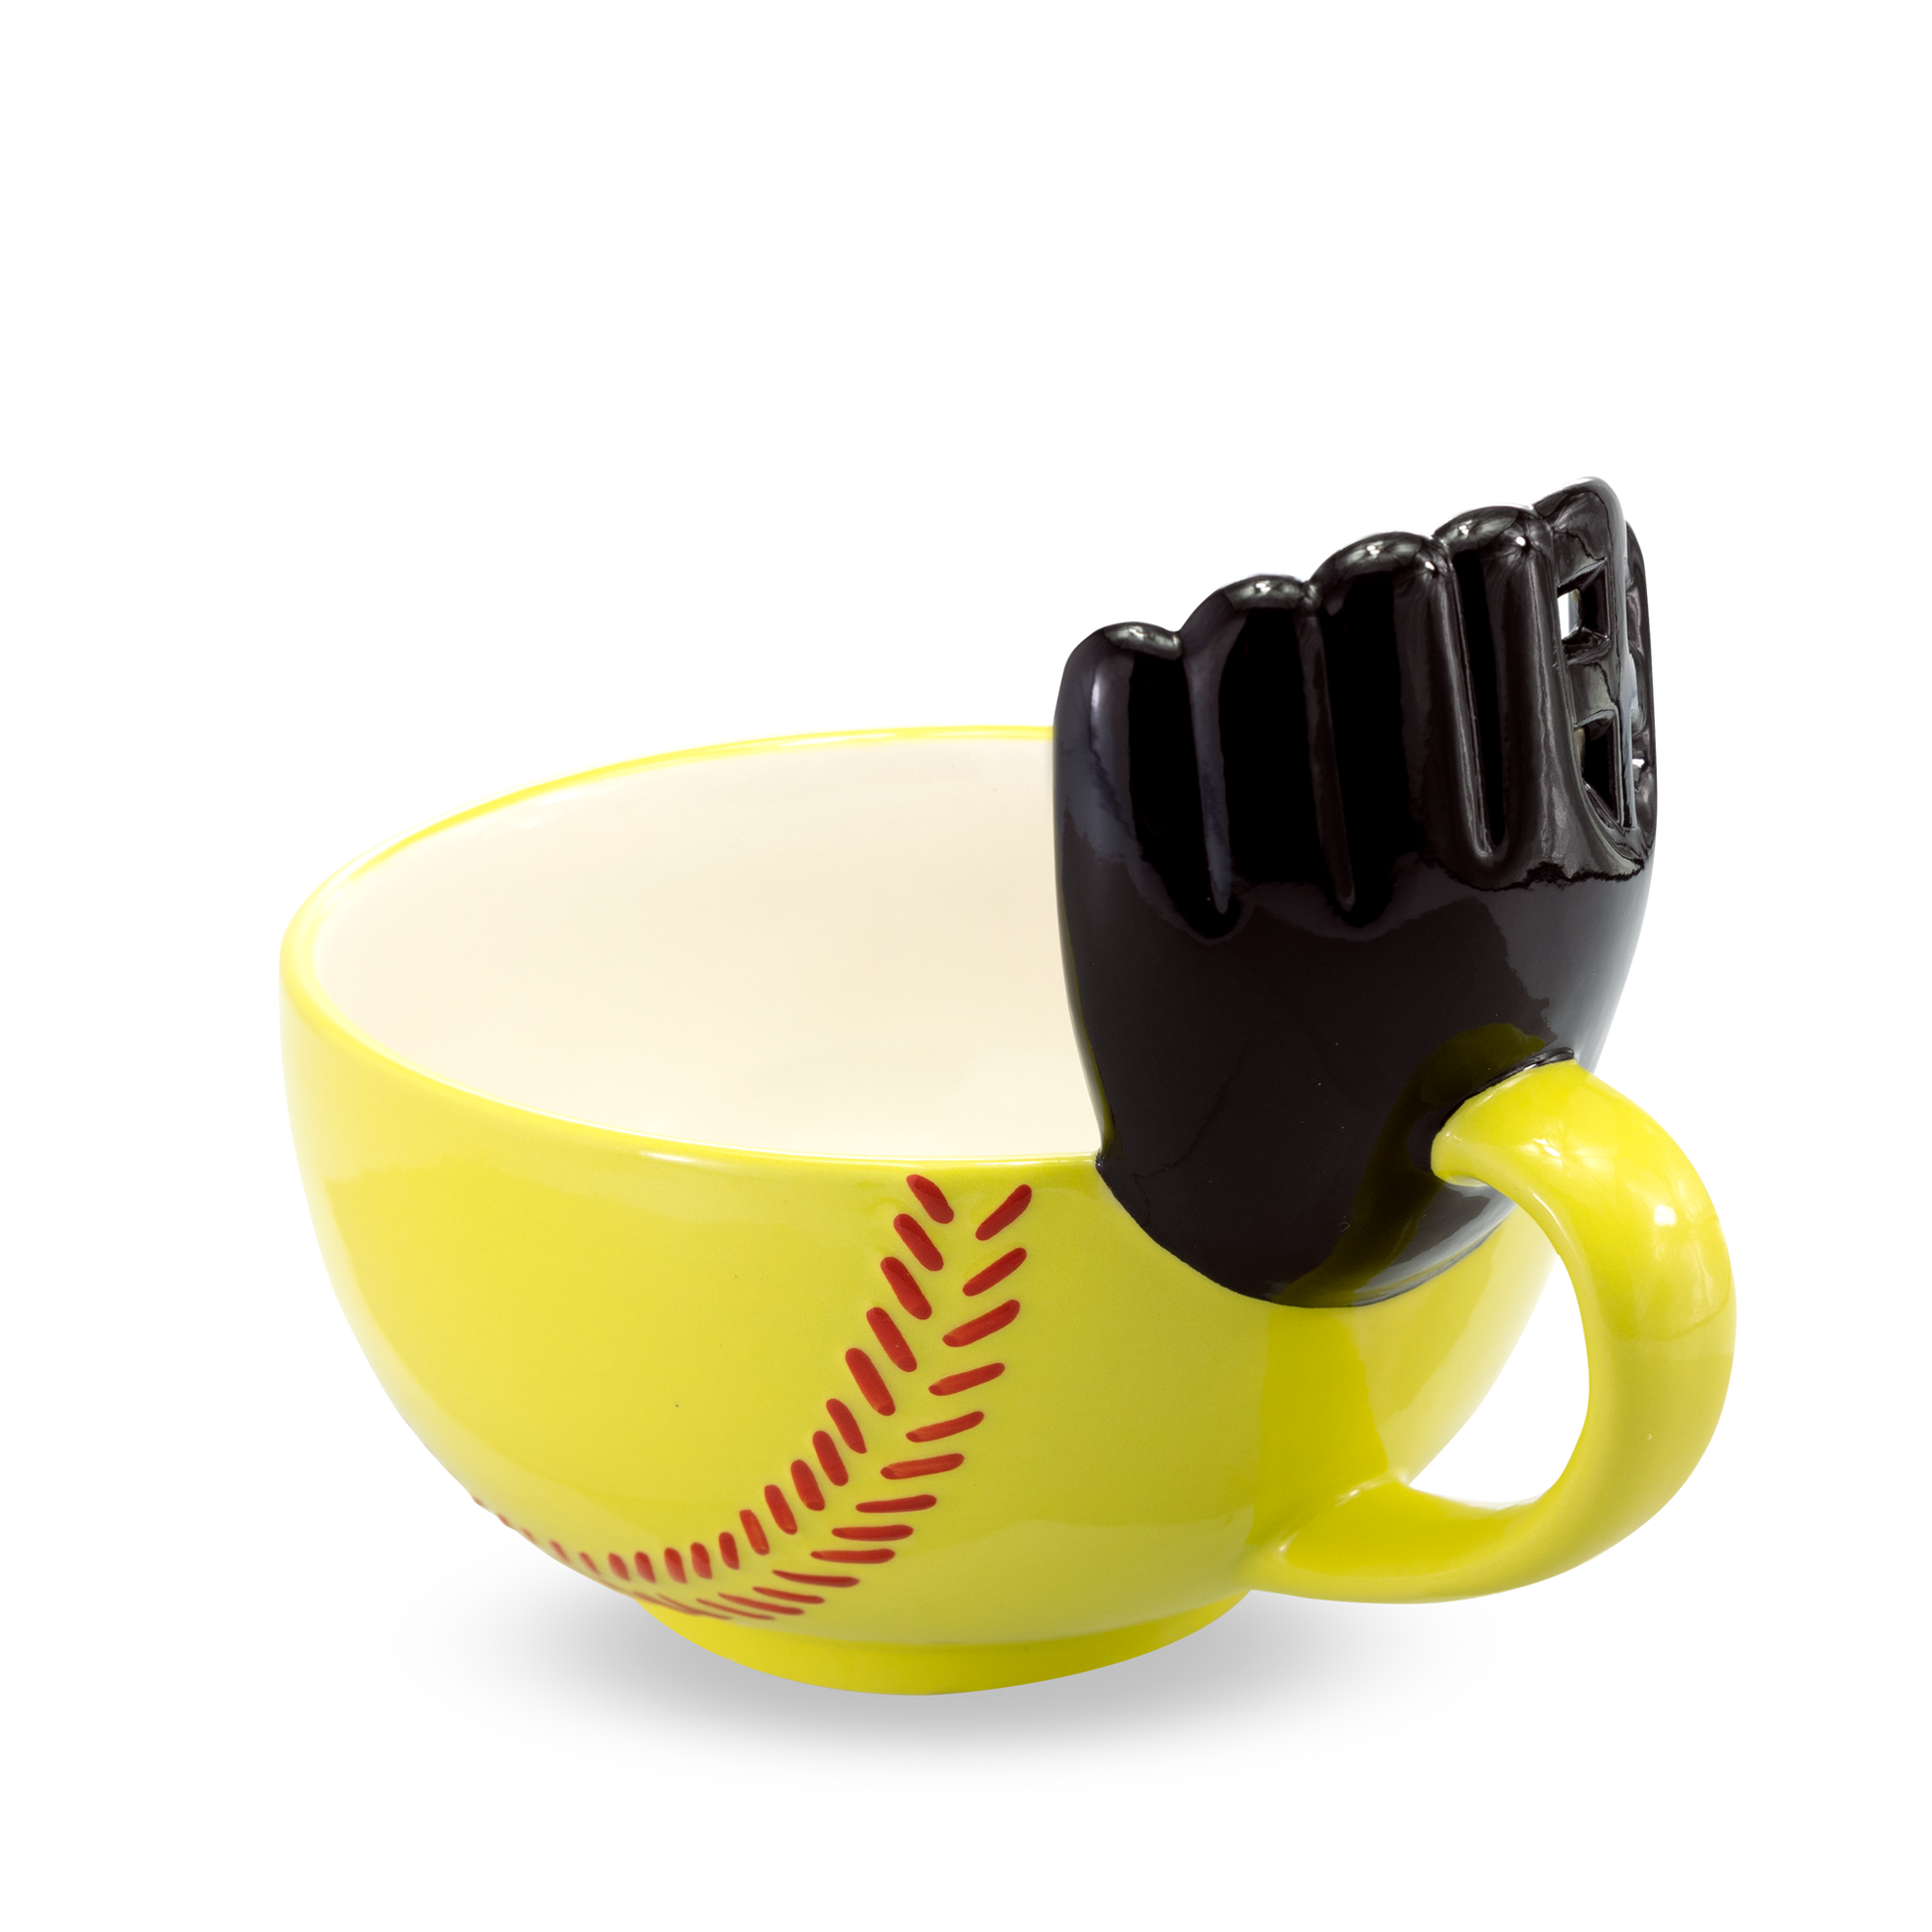 The Softball Mug with a Glove! START YOUR MORNINGS WITH FUN! Play with your food with this original yellow softball mug with an attached glove. Perfect for scoring mini marshmallows into cocoa, cereal into milk, crackers into soup, or toppings onto ice cream! Something to root for in your morning routine!   